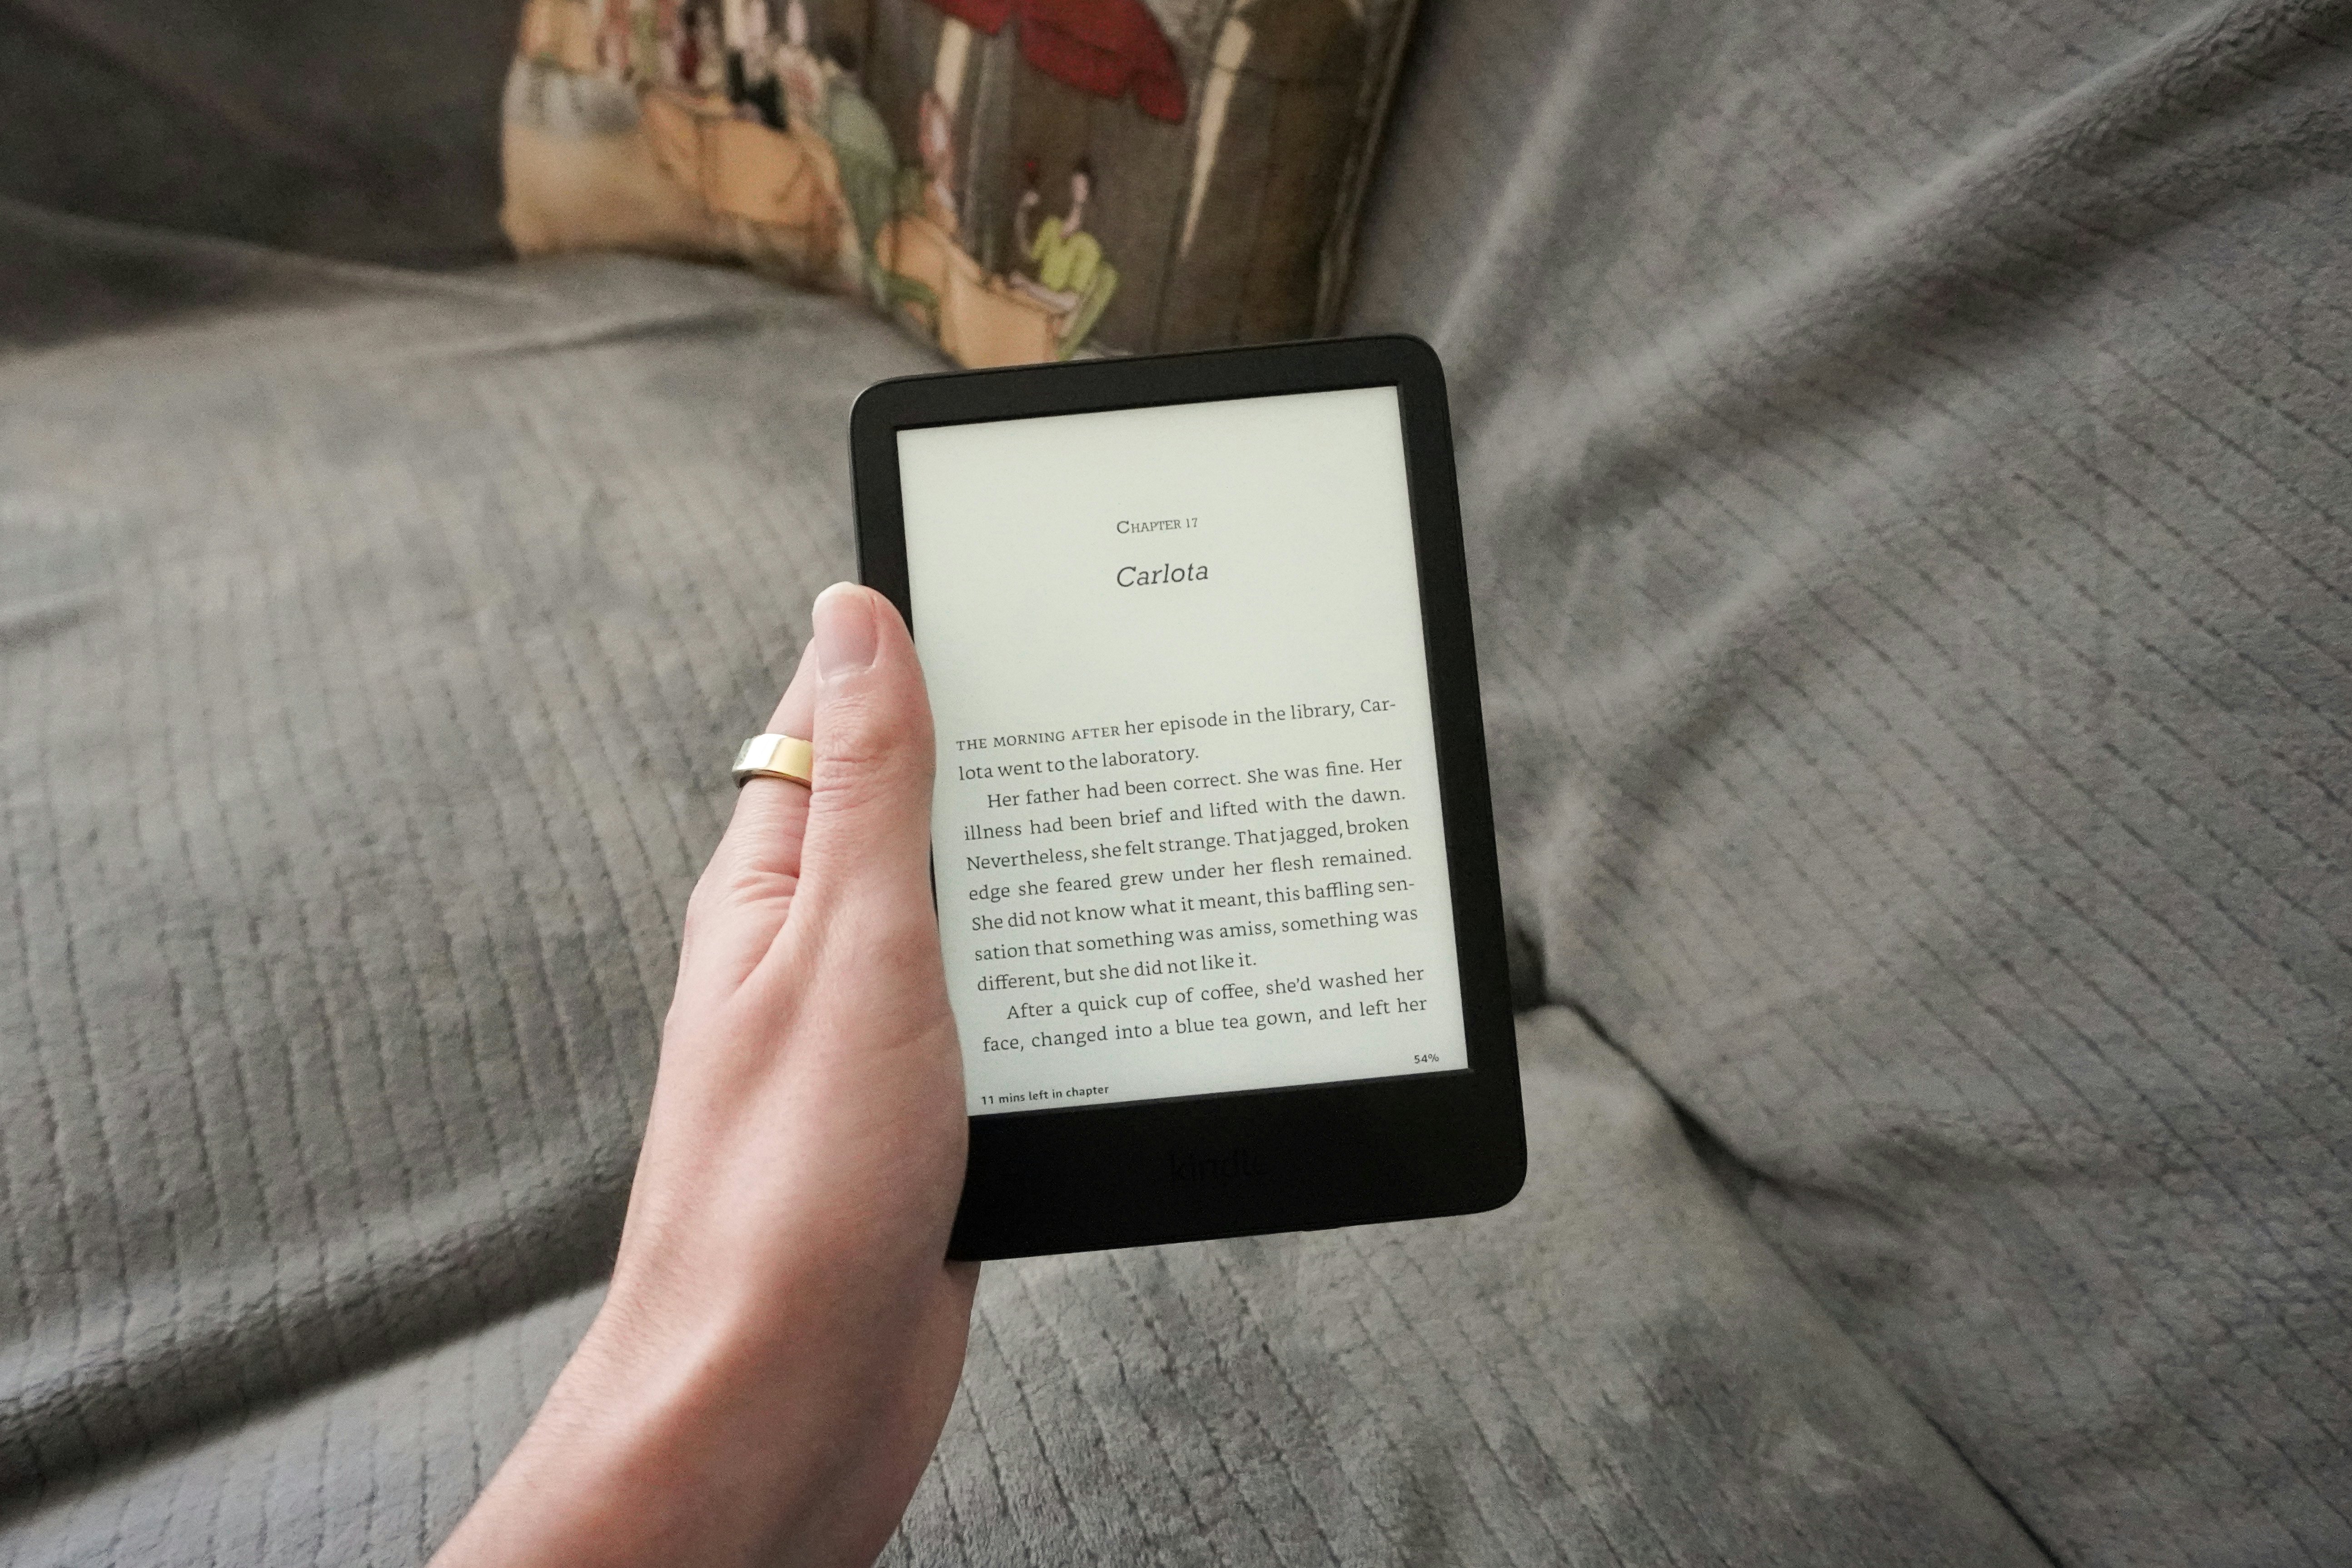 The new  Kindle is smaller, cheaper and comes with USB-C